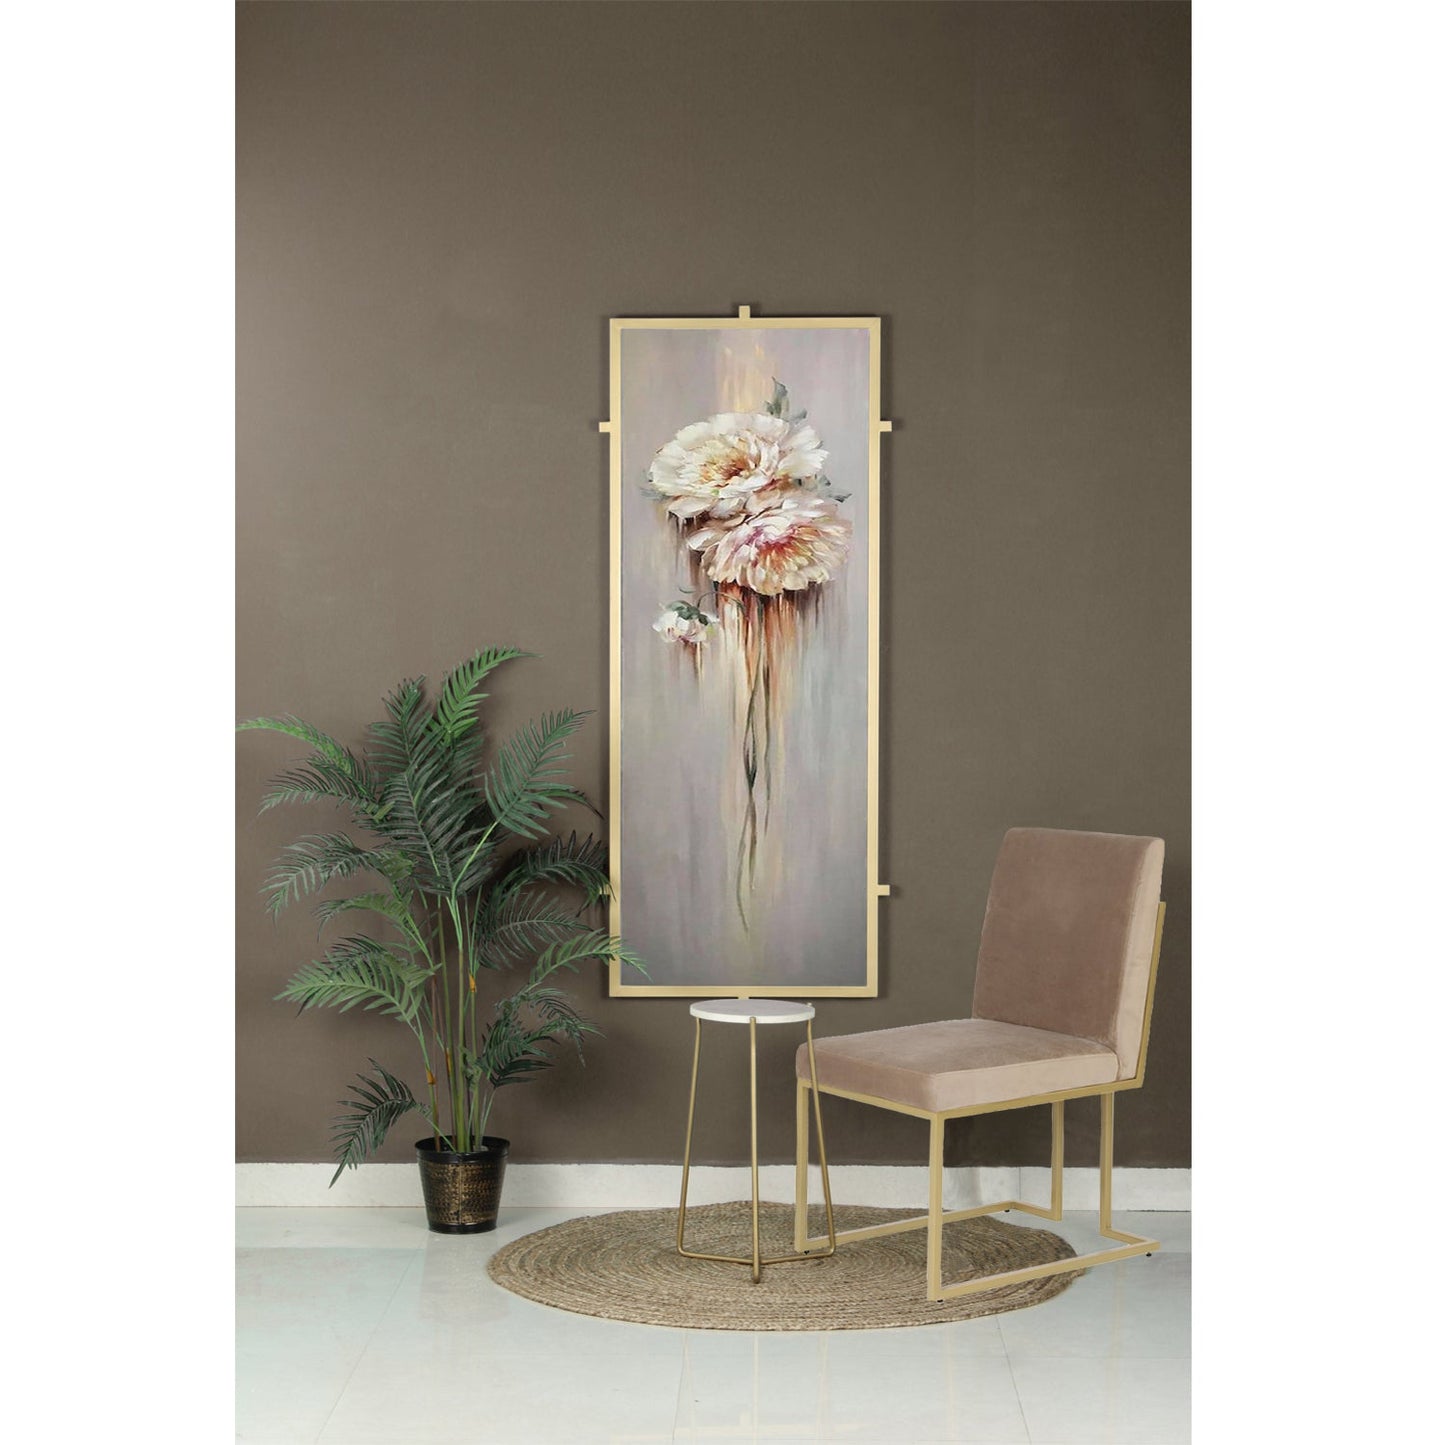 Finley Beige Velvet Fabric Dining Metal Chair In Gold Finish